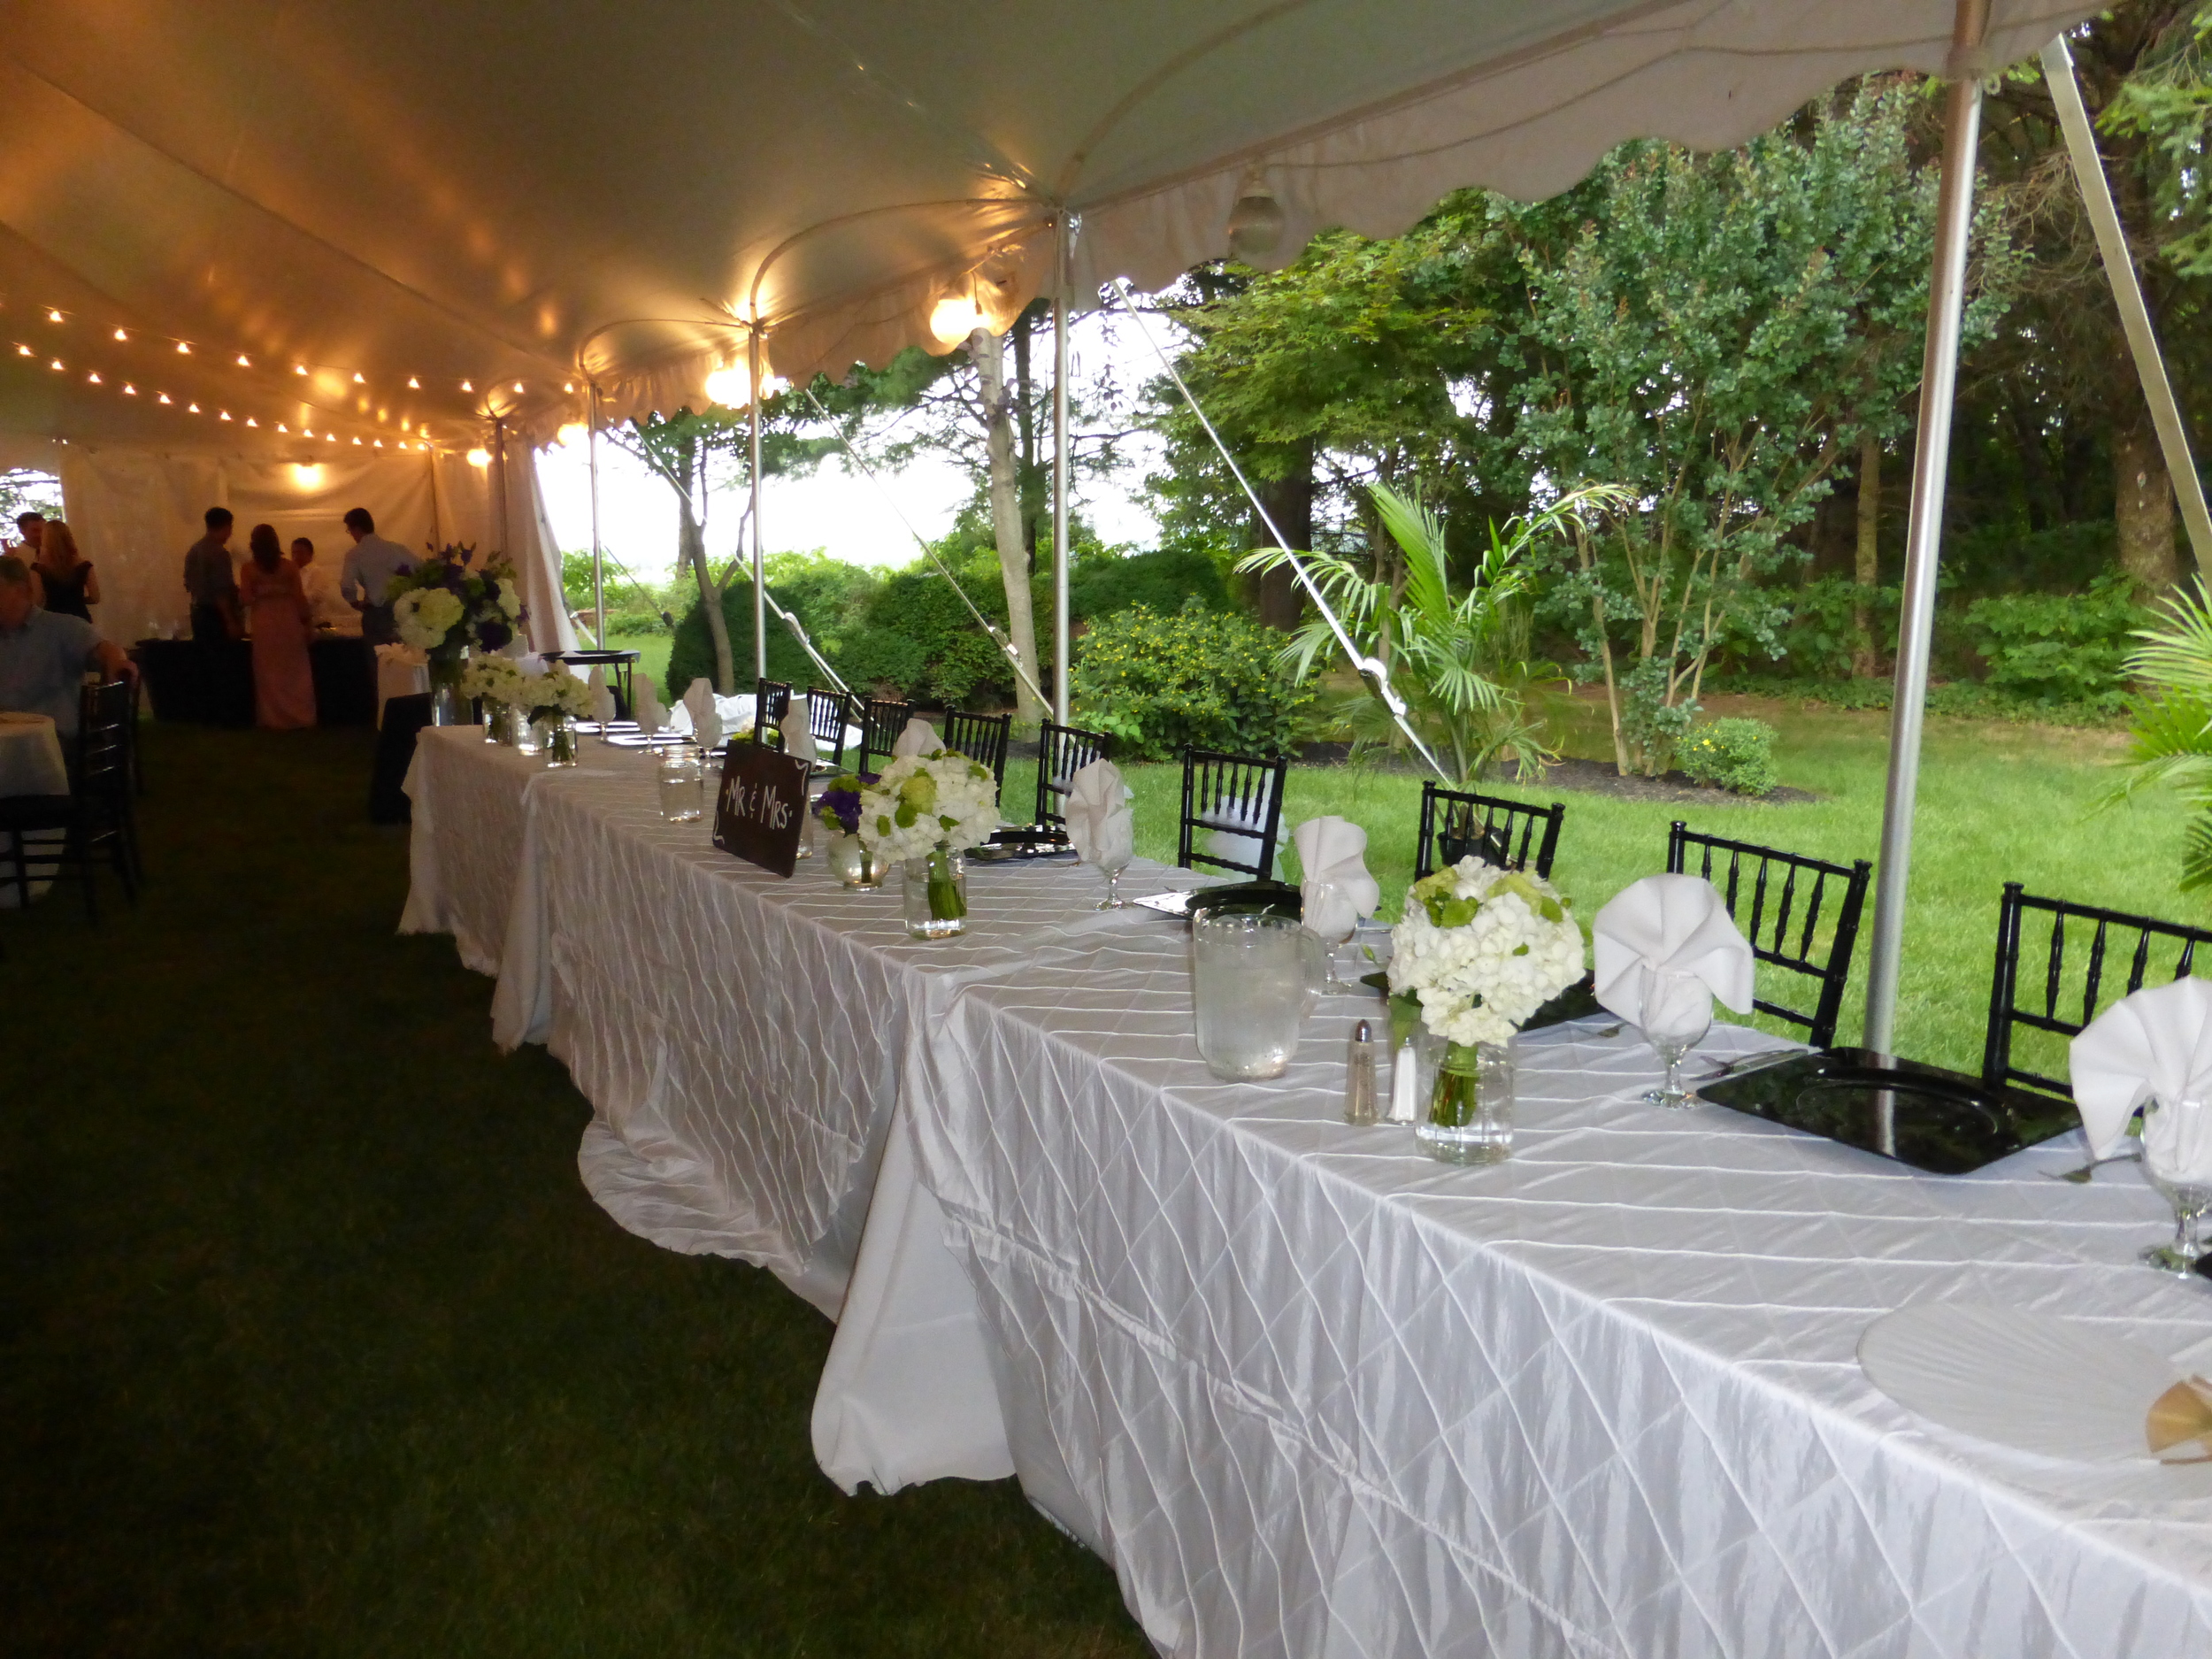 White wedding tent with cafe lights and globe lights